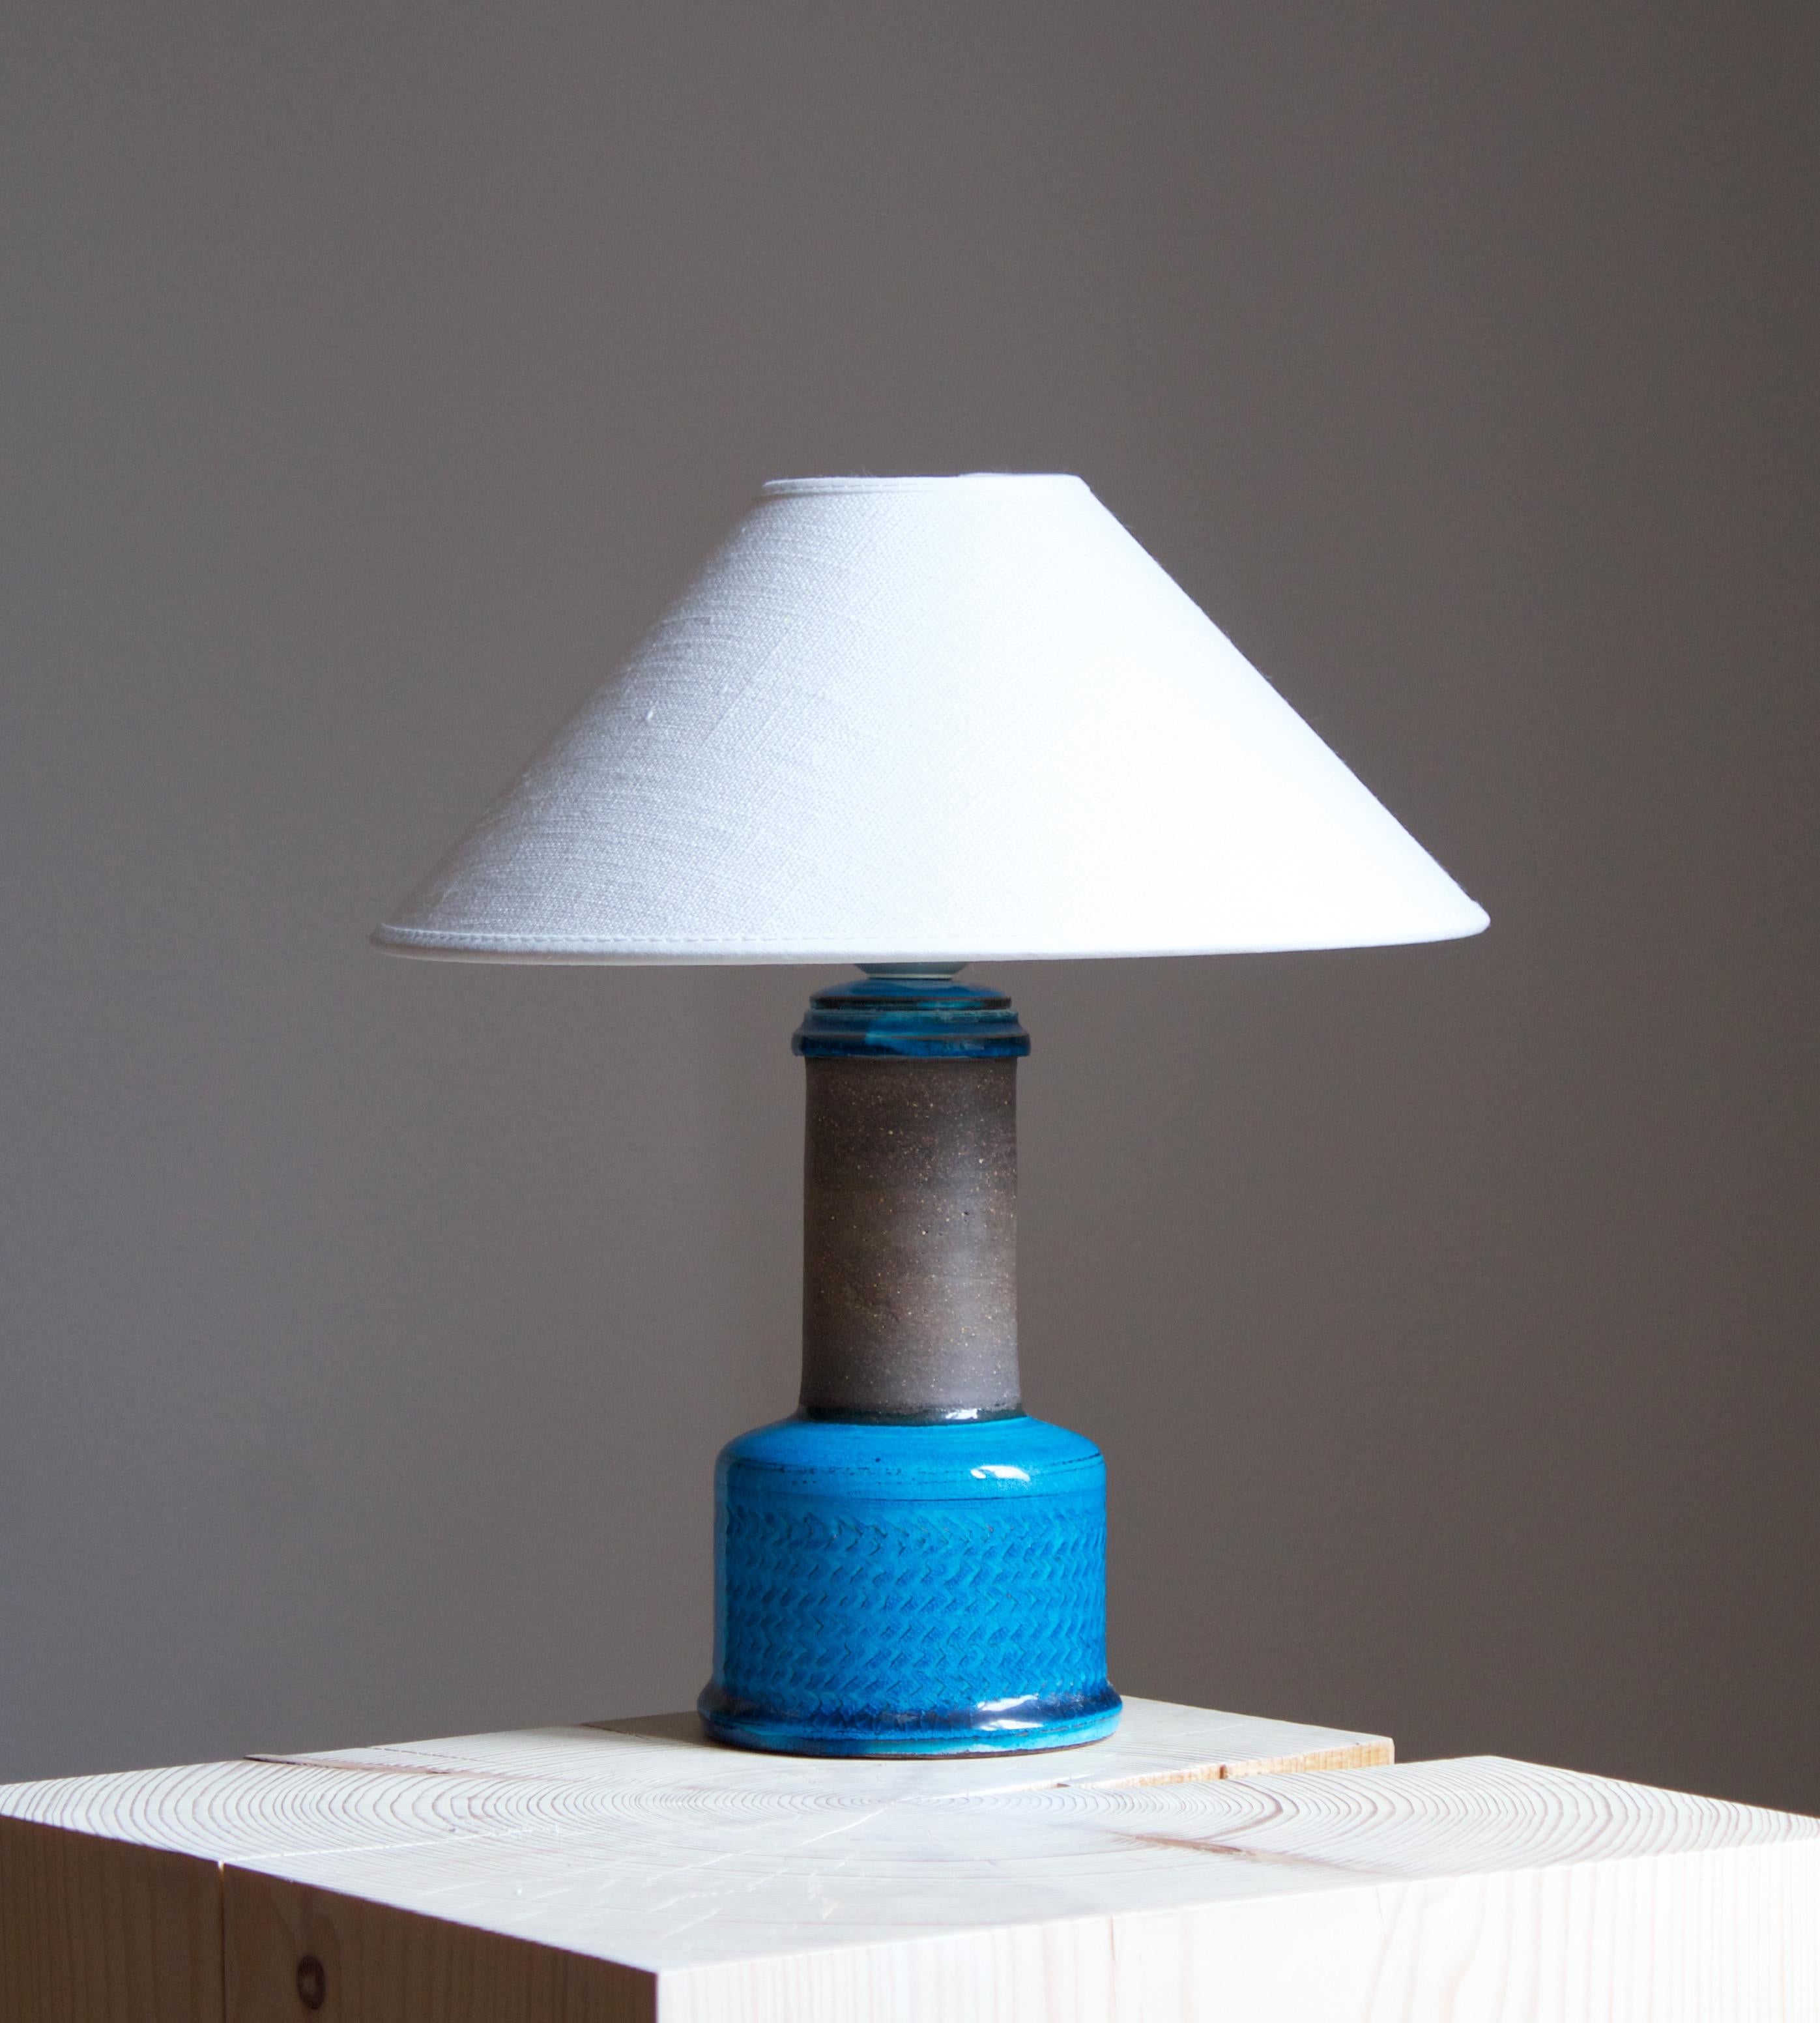 A table lamp designed by Nils Kähler., Denmark, 1950s. In blue glazed stoneware.

Purchase does not include lampshade. Stated dimensions exclude lampshade, height includes socket.

Other designers of the period include Palshus, Axel Salto,